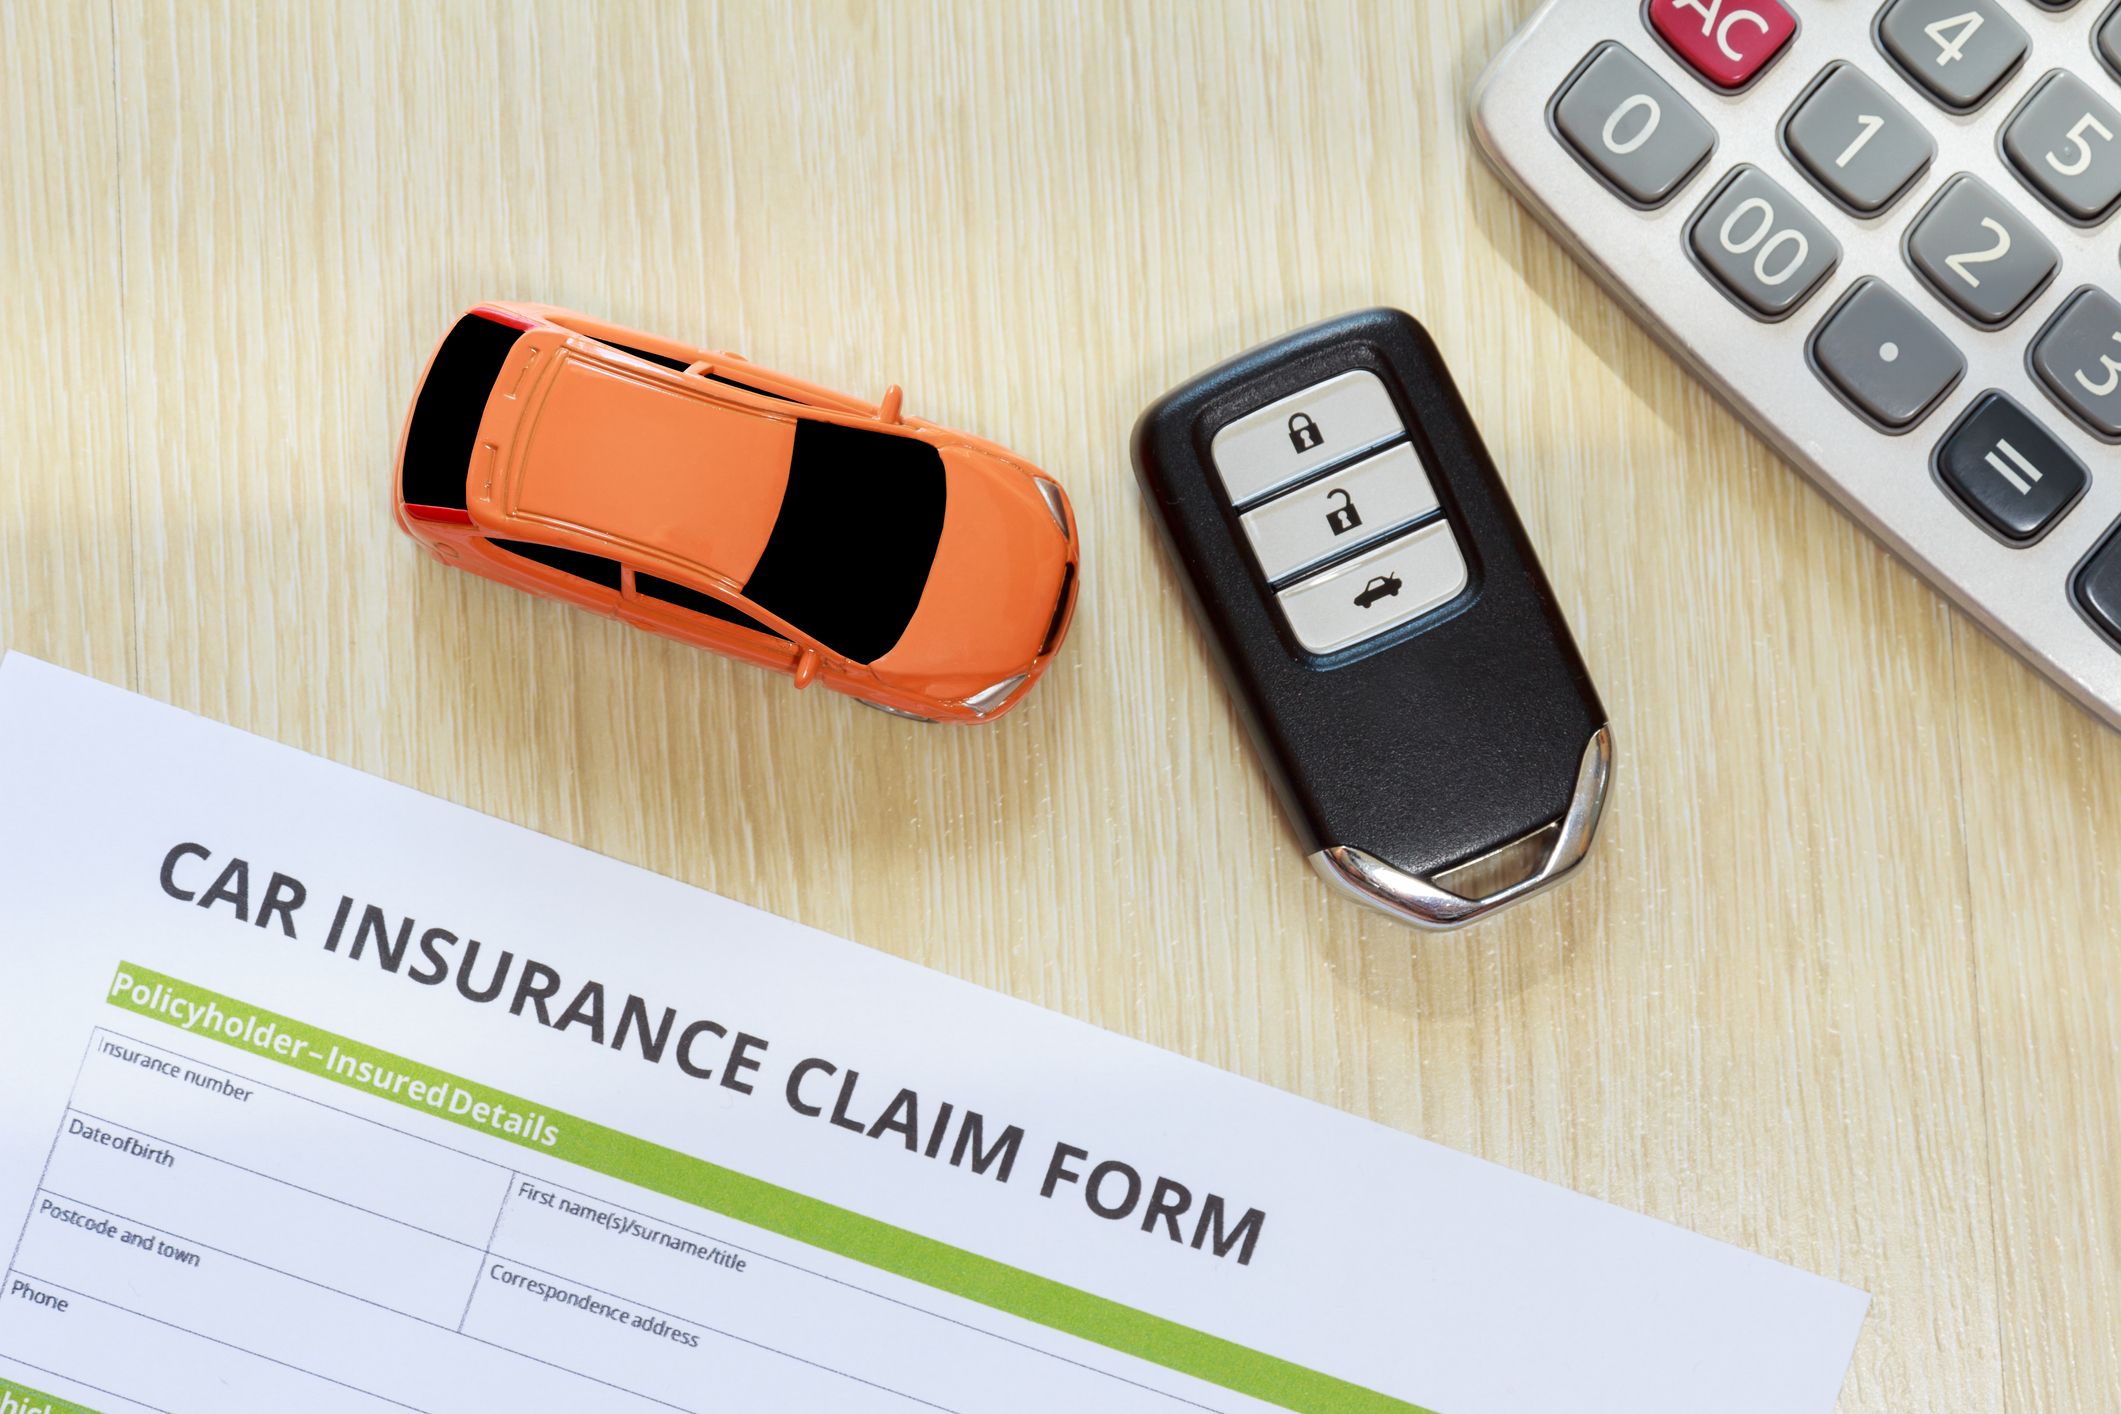 How Long Does It Take To Set Up Car Insurance